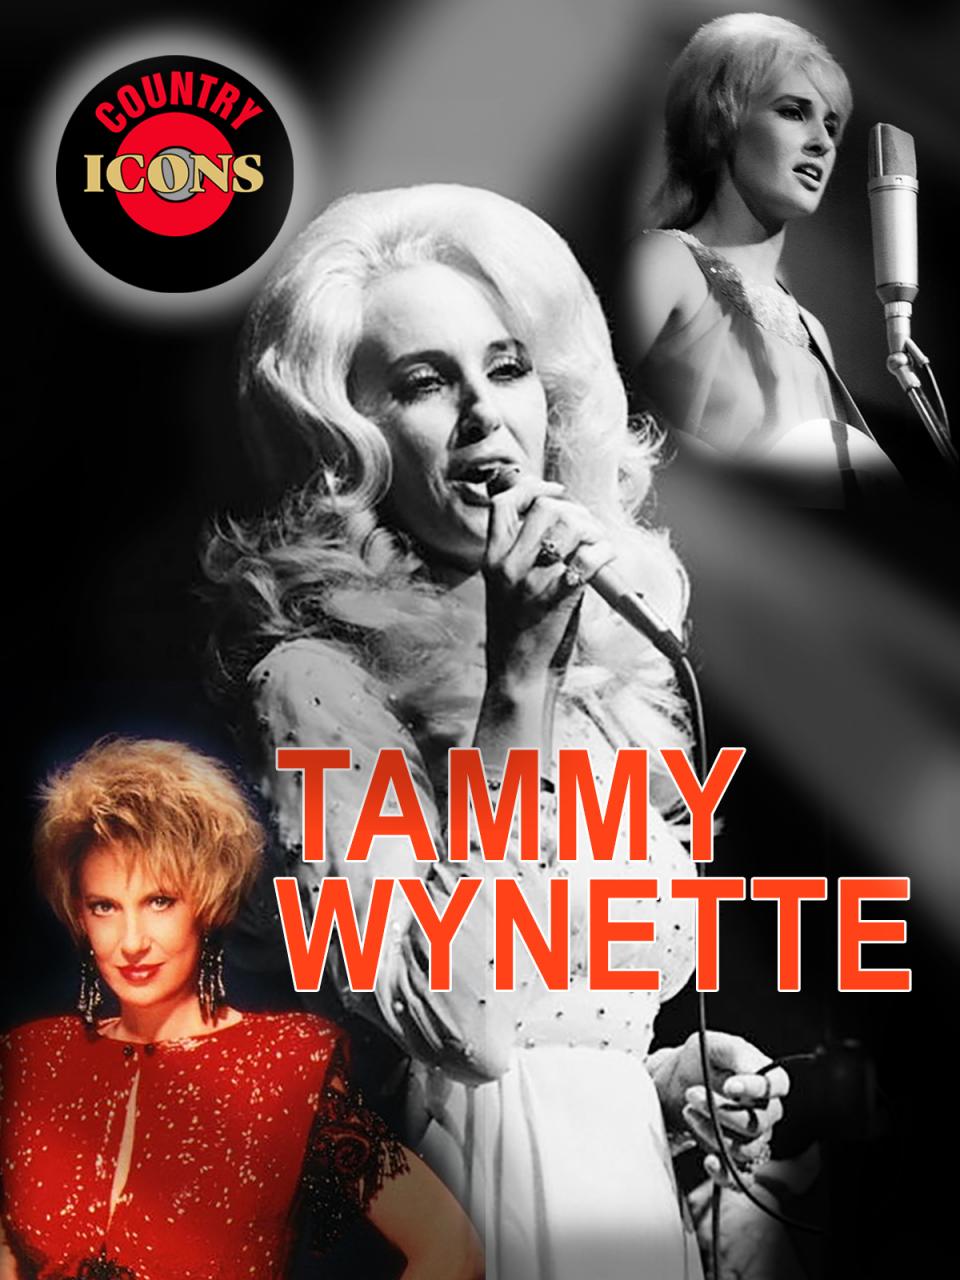 Country Icons: Tammy Wynette